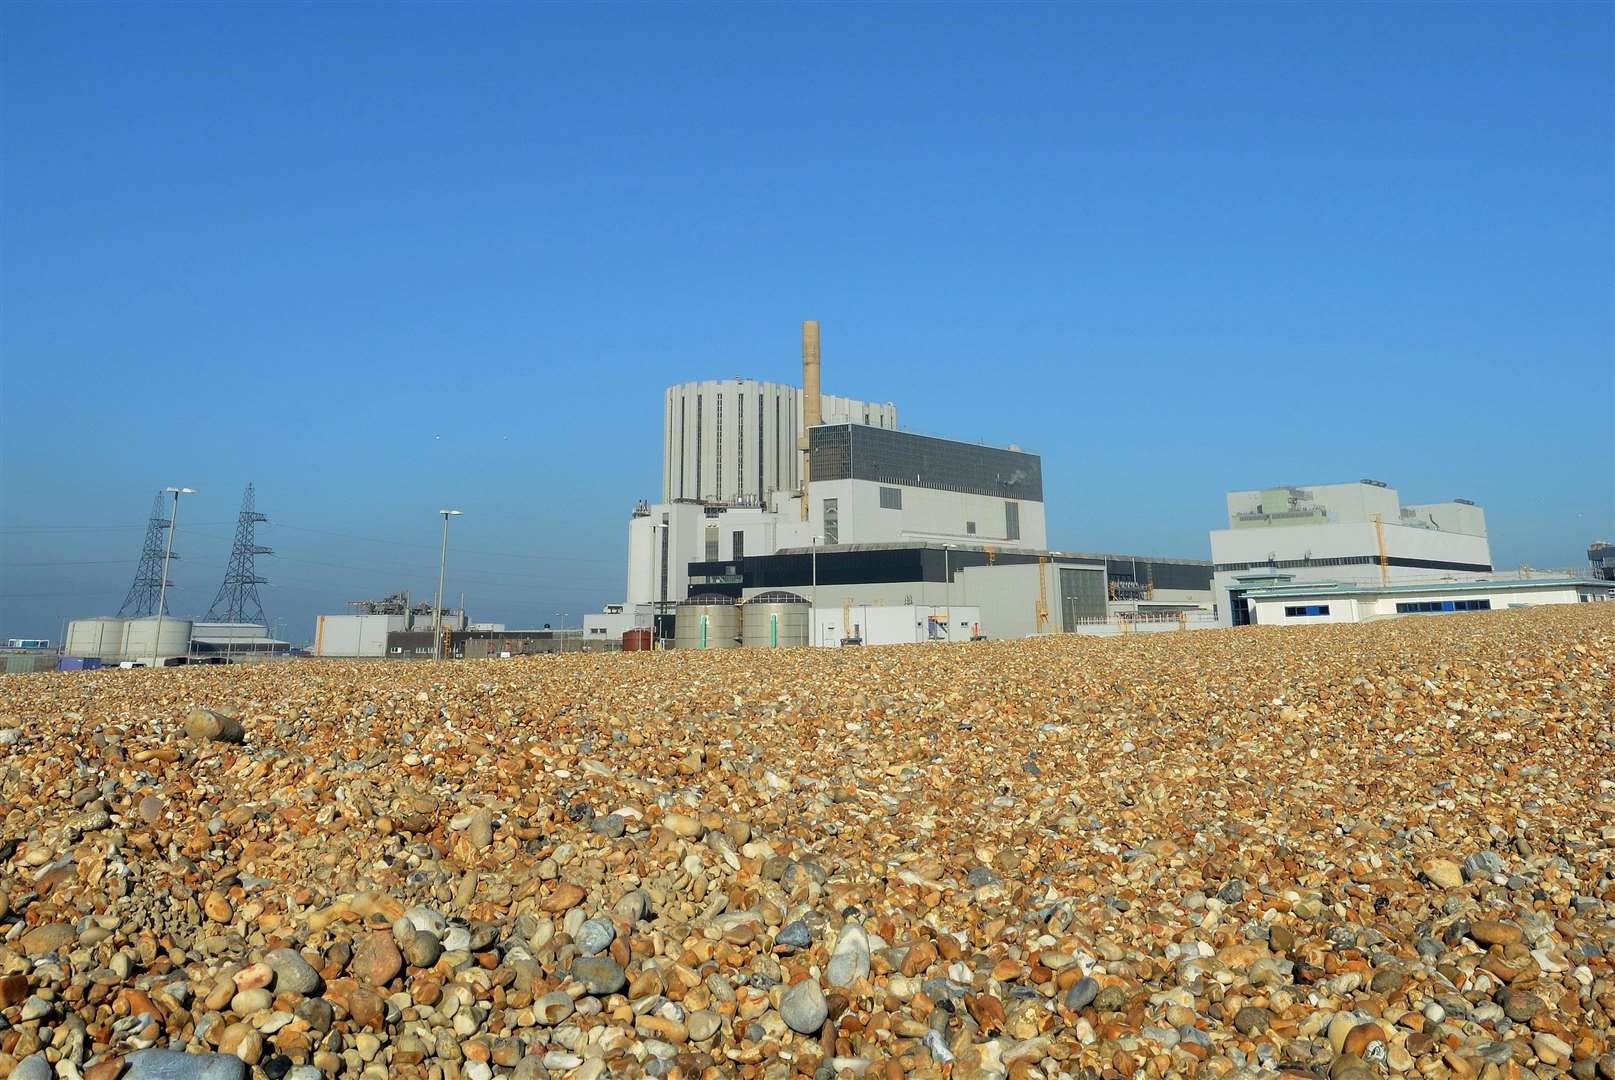 Dungeness B power station in Kent